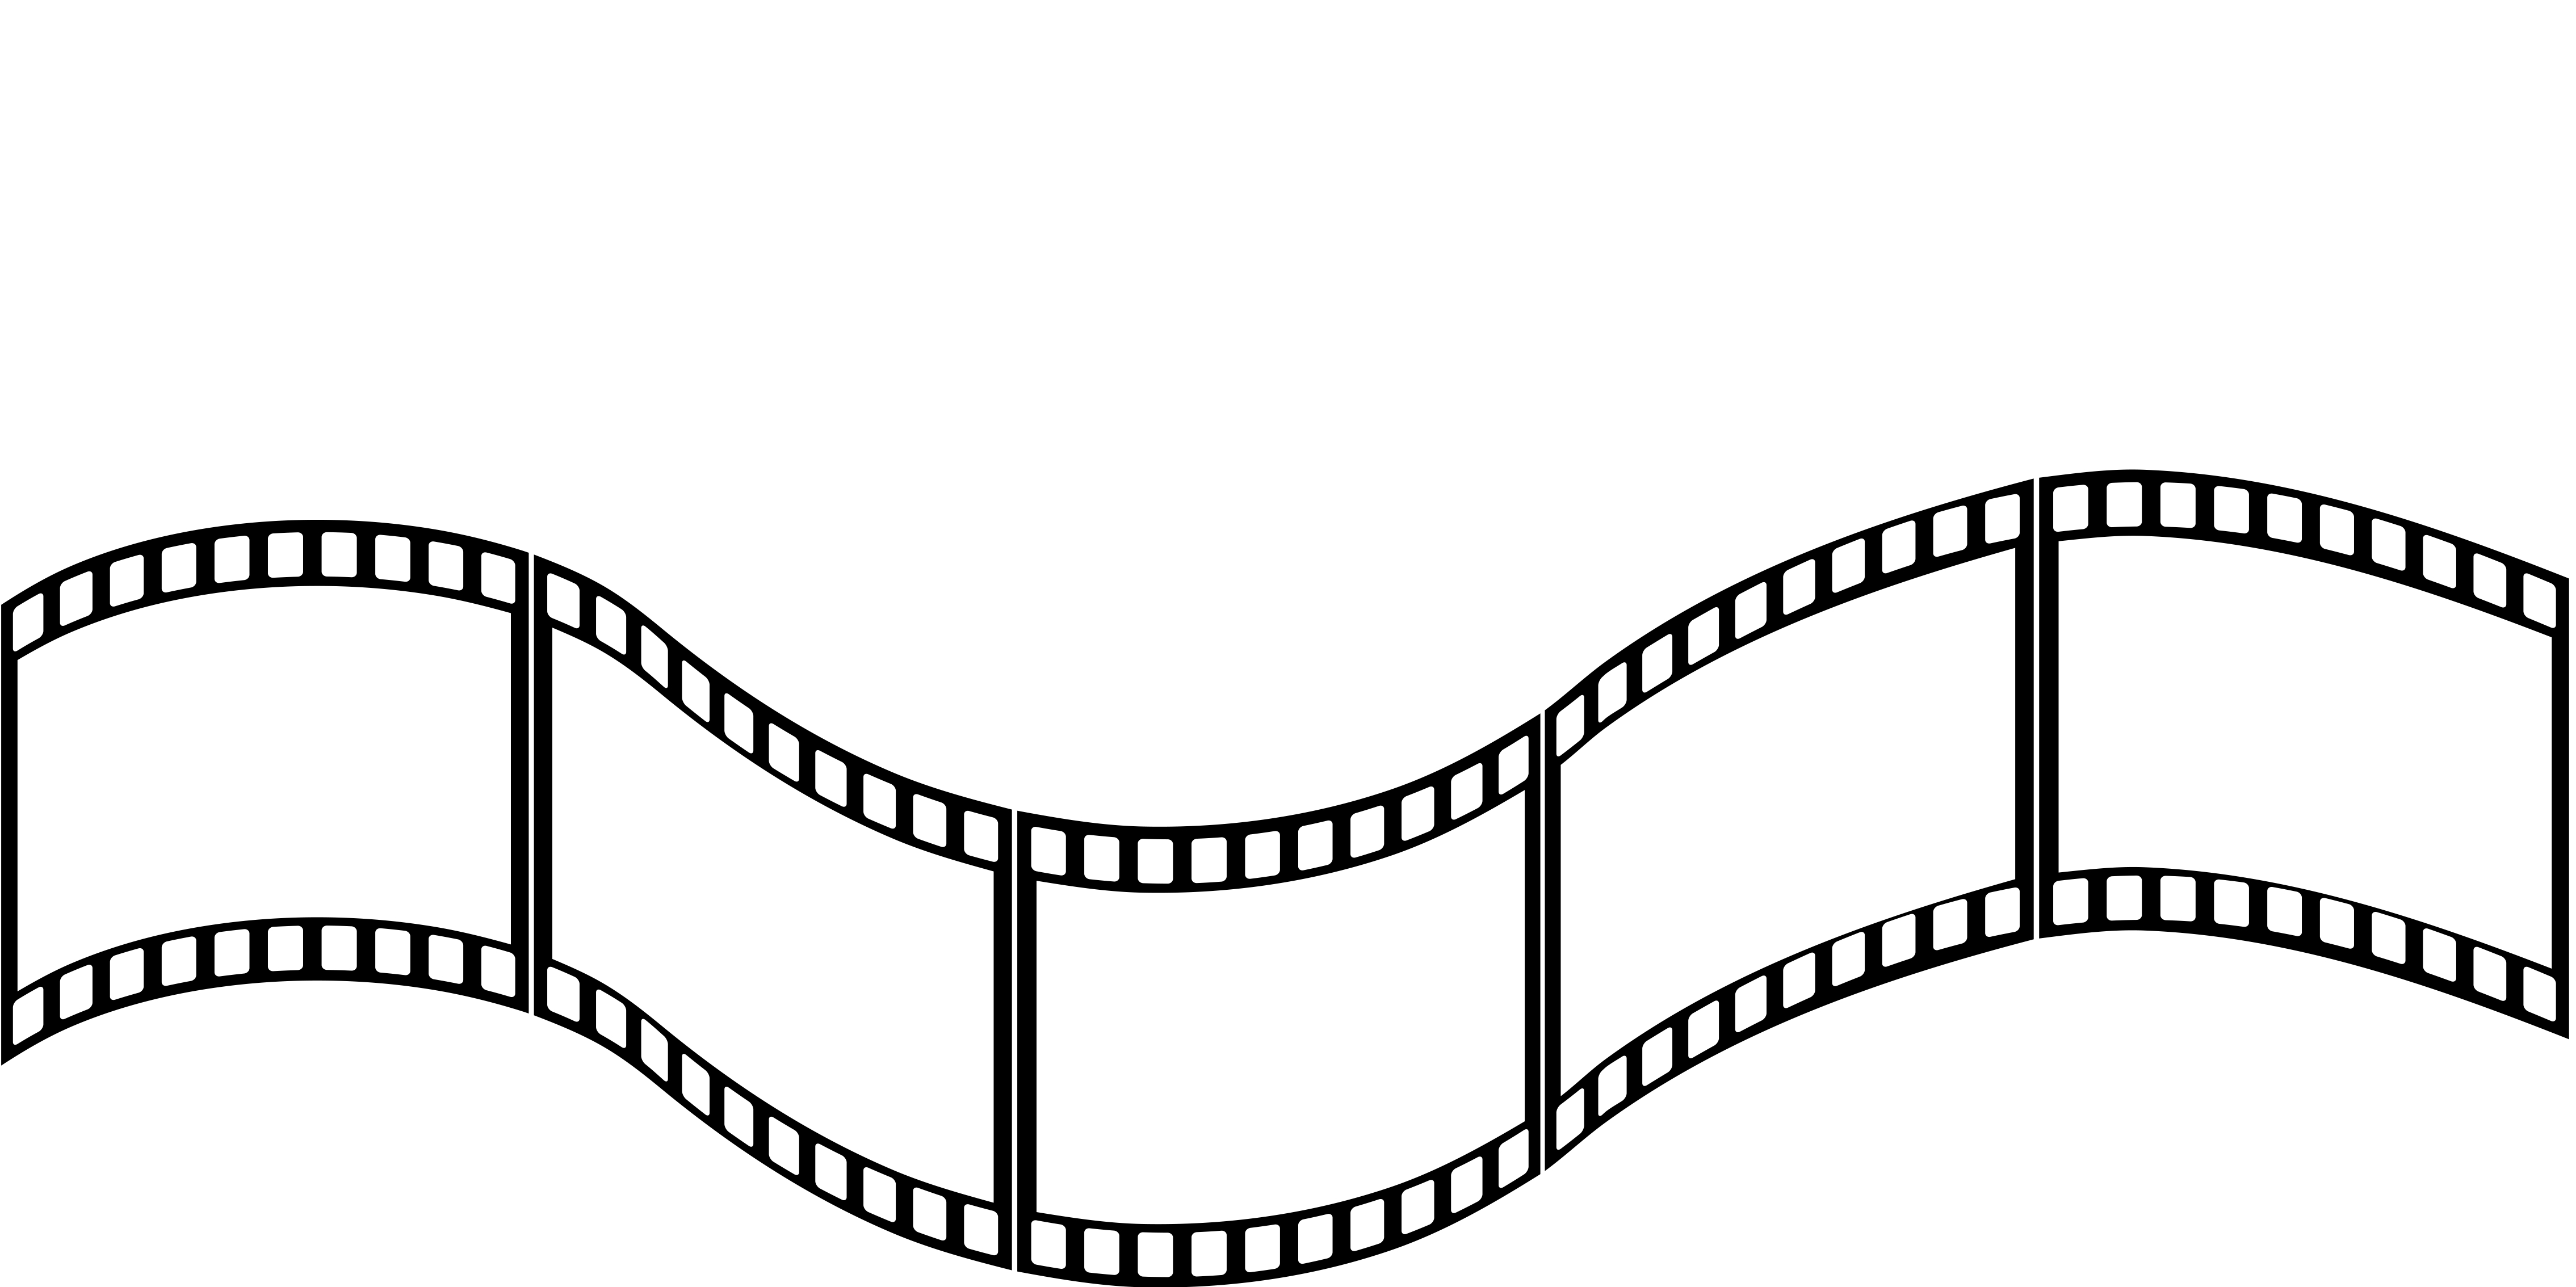 Movie Reel Png Pictures 5 HD Wallpapers | amagico.com